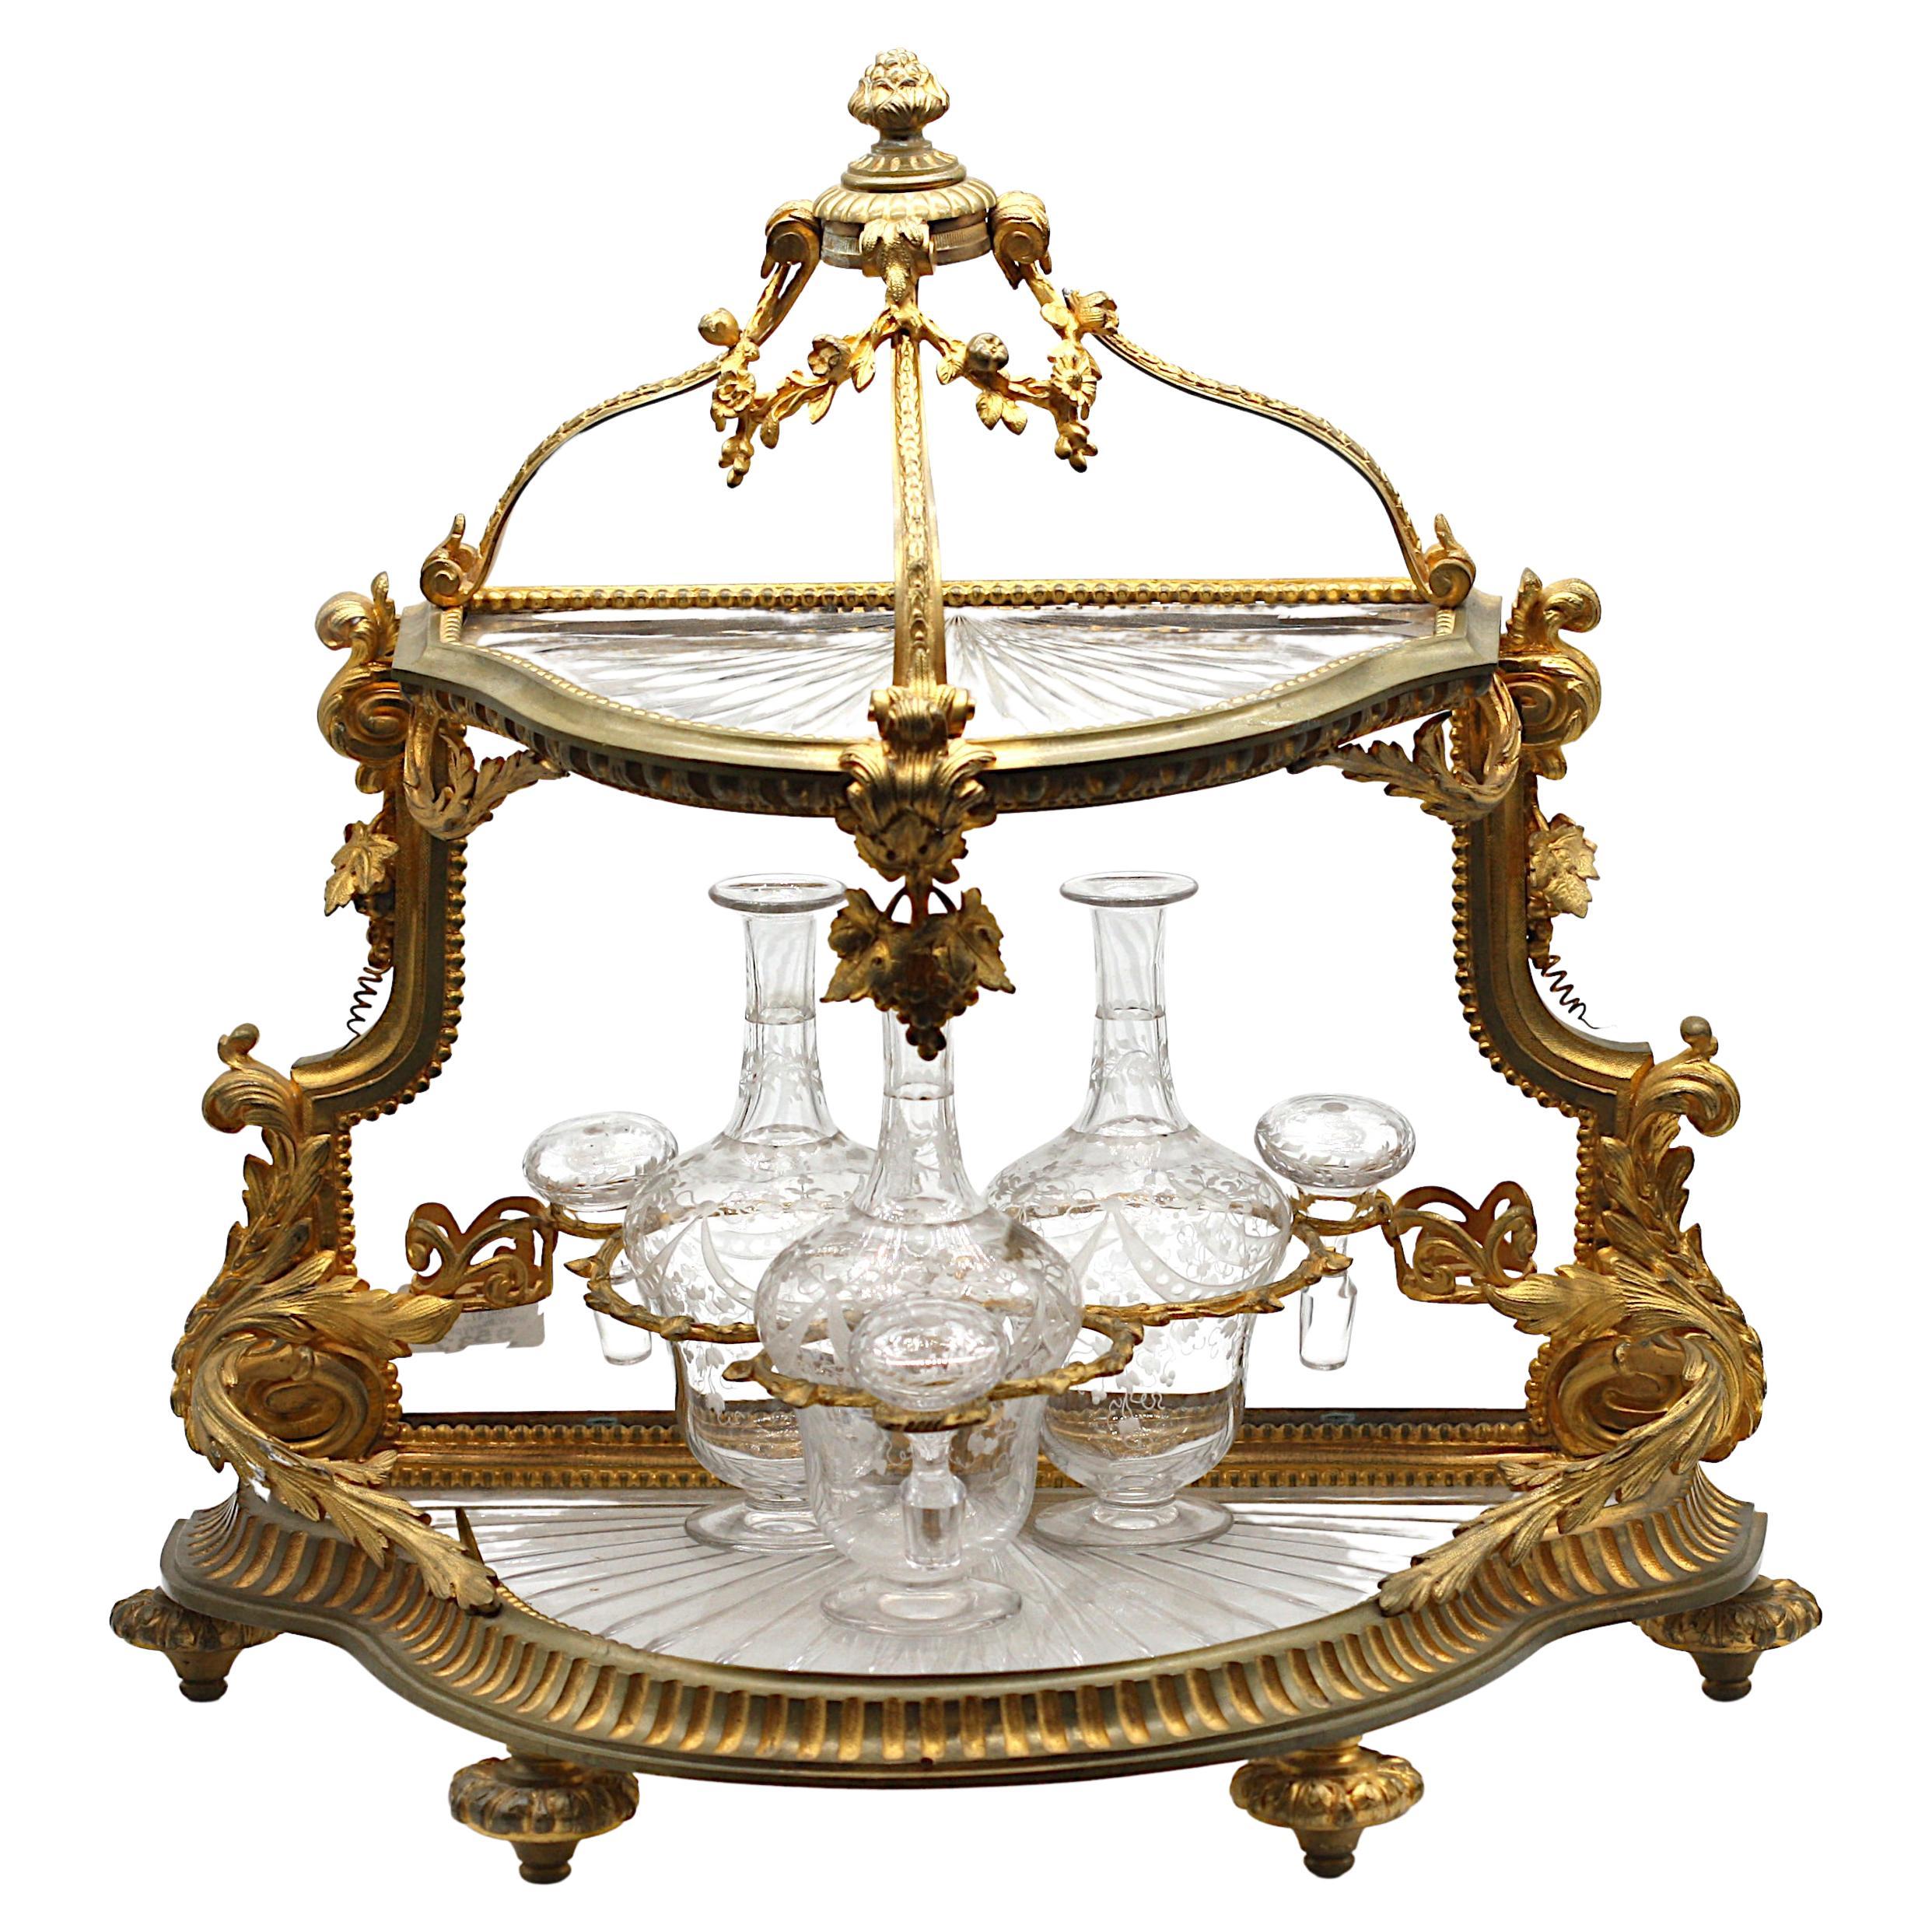 French Gilt Bronze and Cut-Glass Tiered Liquor 'Tantalus' Set For Sale